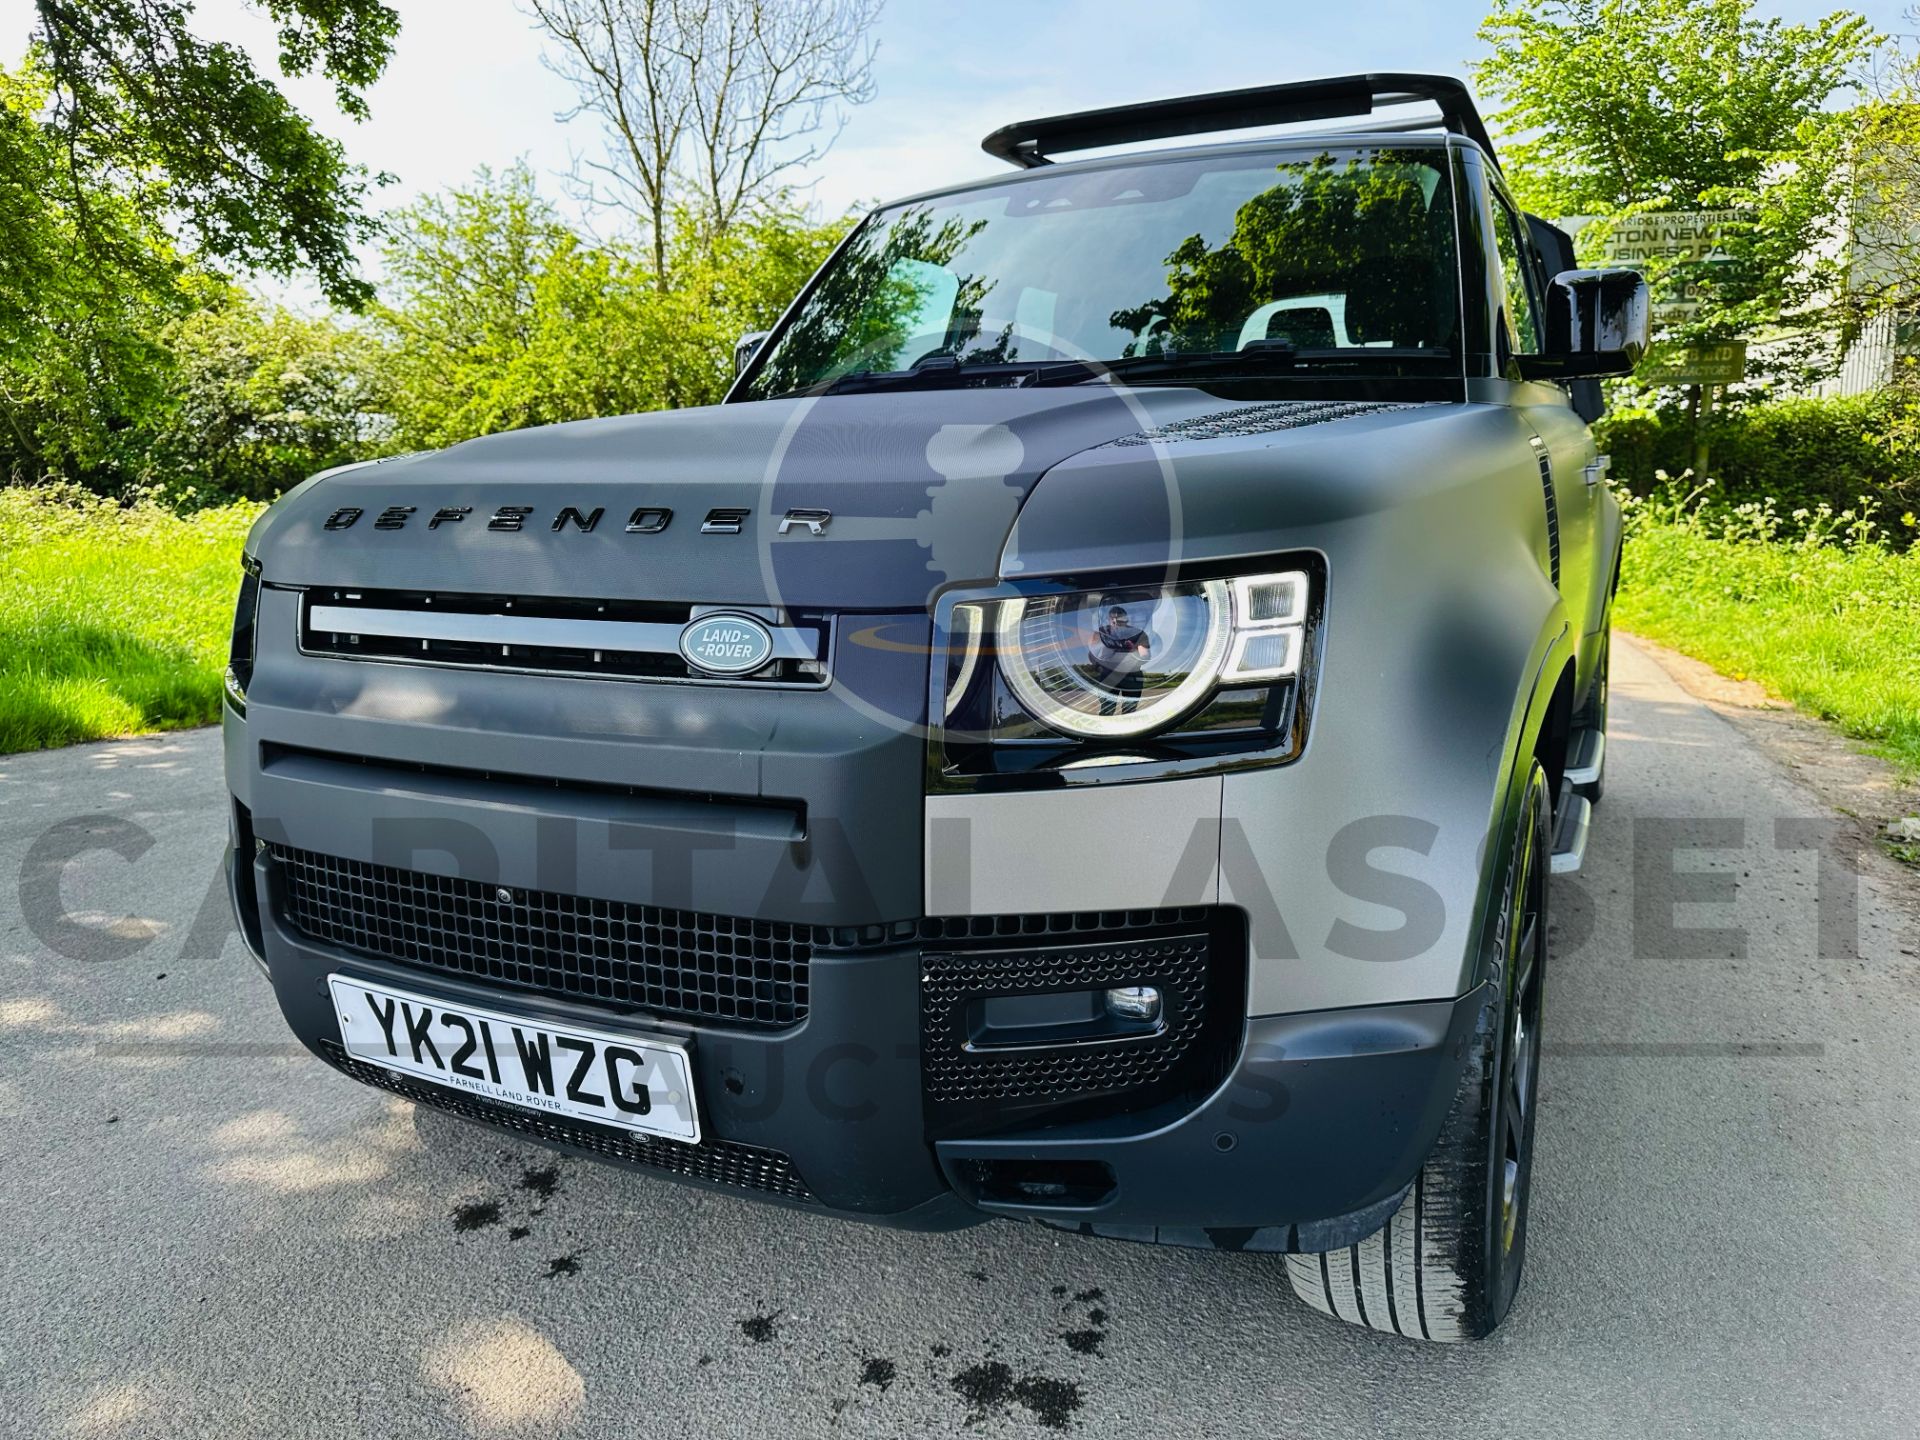 (On Sale) LAND ROVER DEFENDER 110 *SE EDITION* 7 SEATER SUV (2021) D300 - 8 SPEED AUTO *HUGE SPEC* - Image 5 of 63